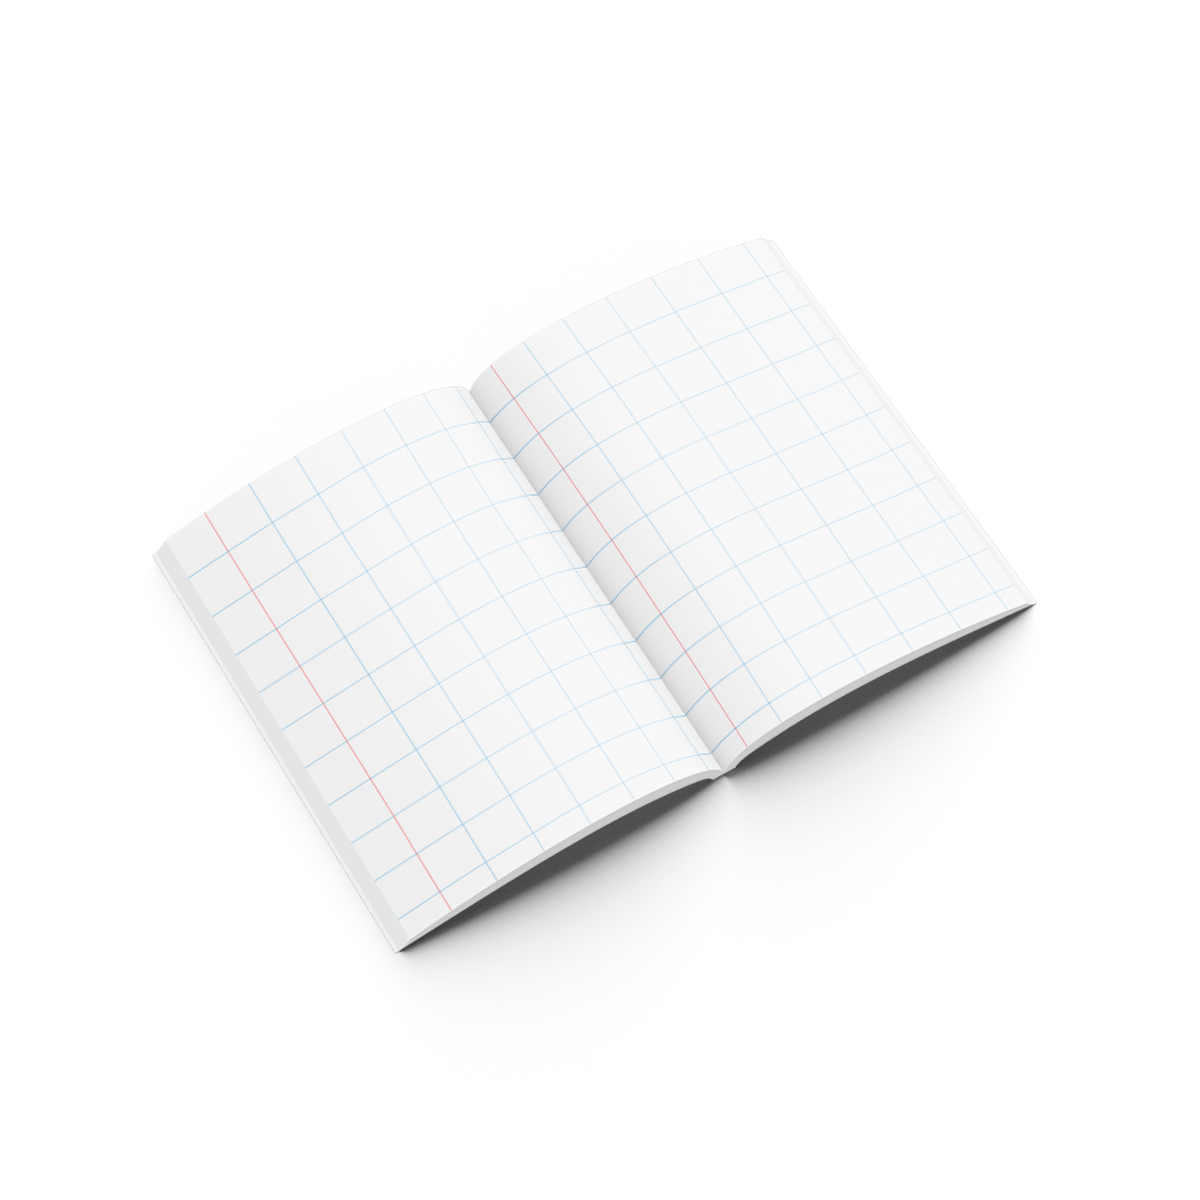 PSI Exercise Book 20mm Square 200 Pages 20M200